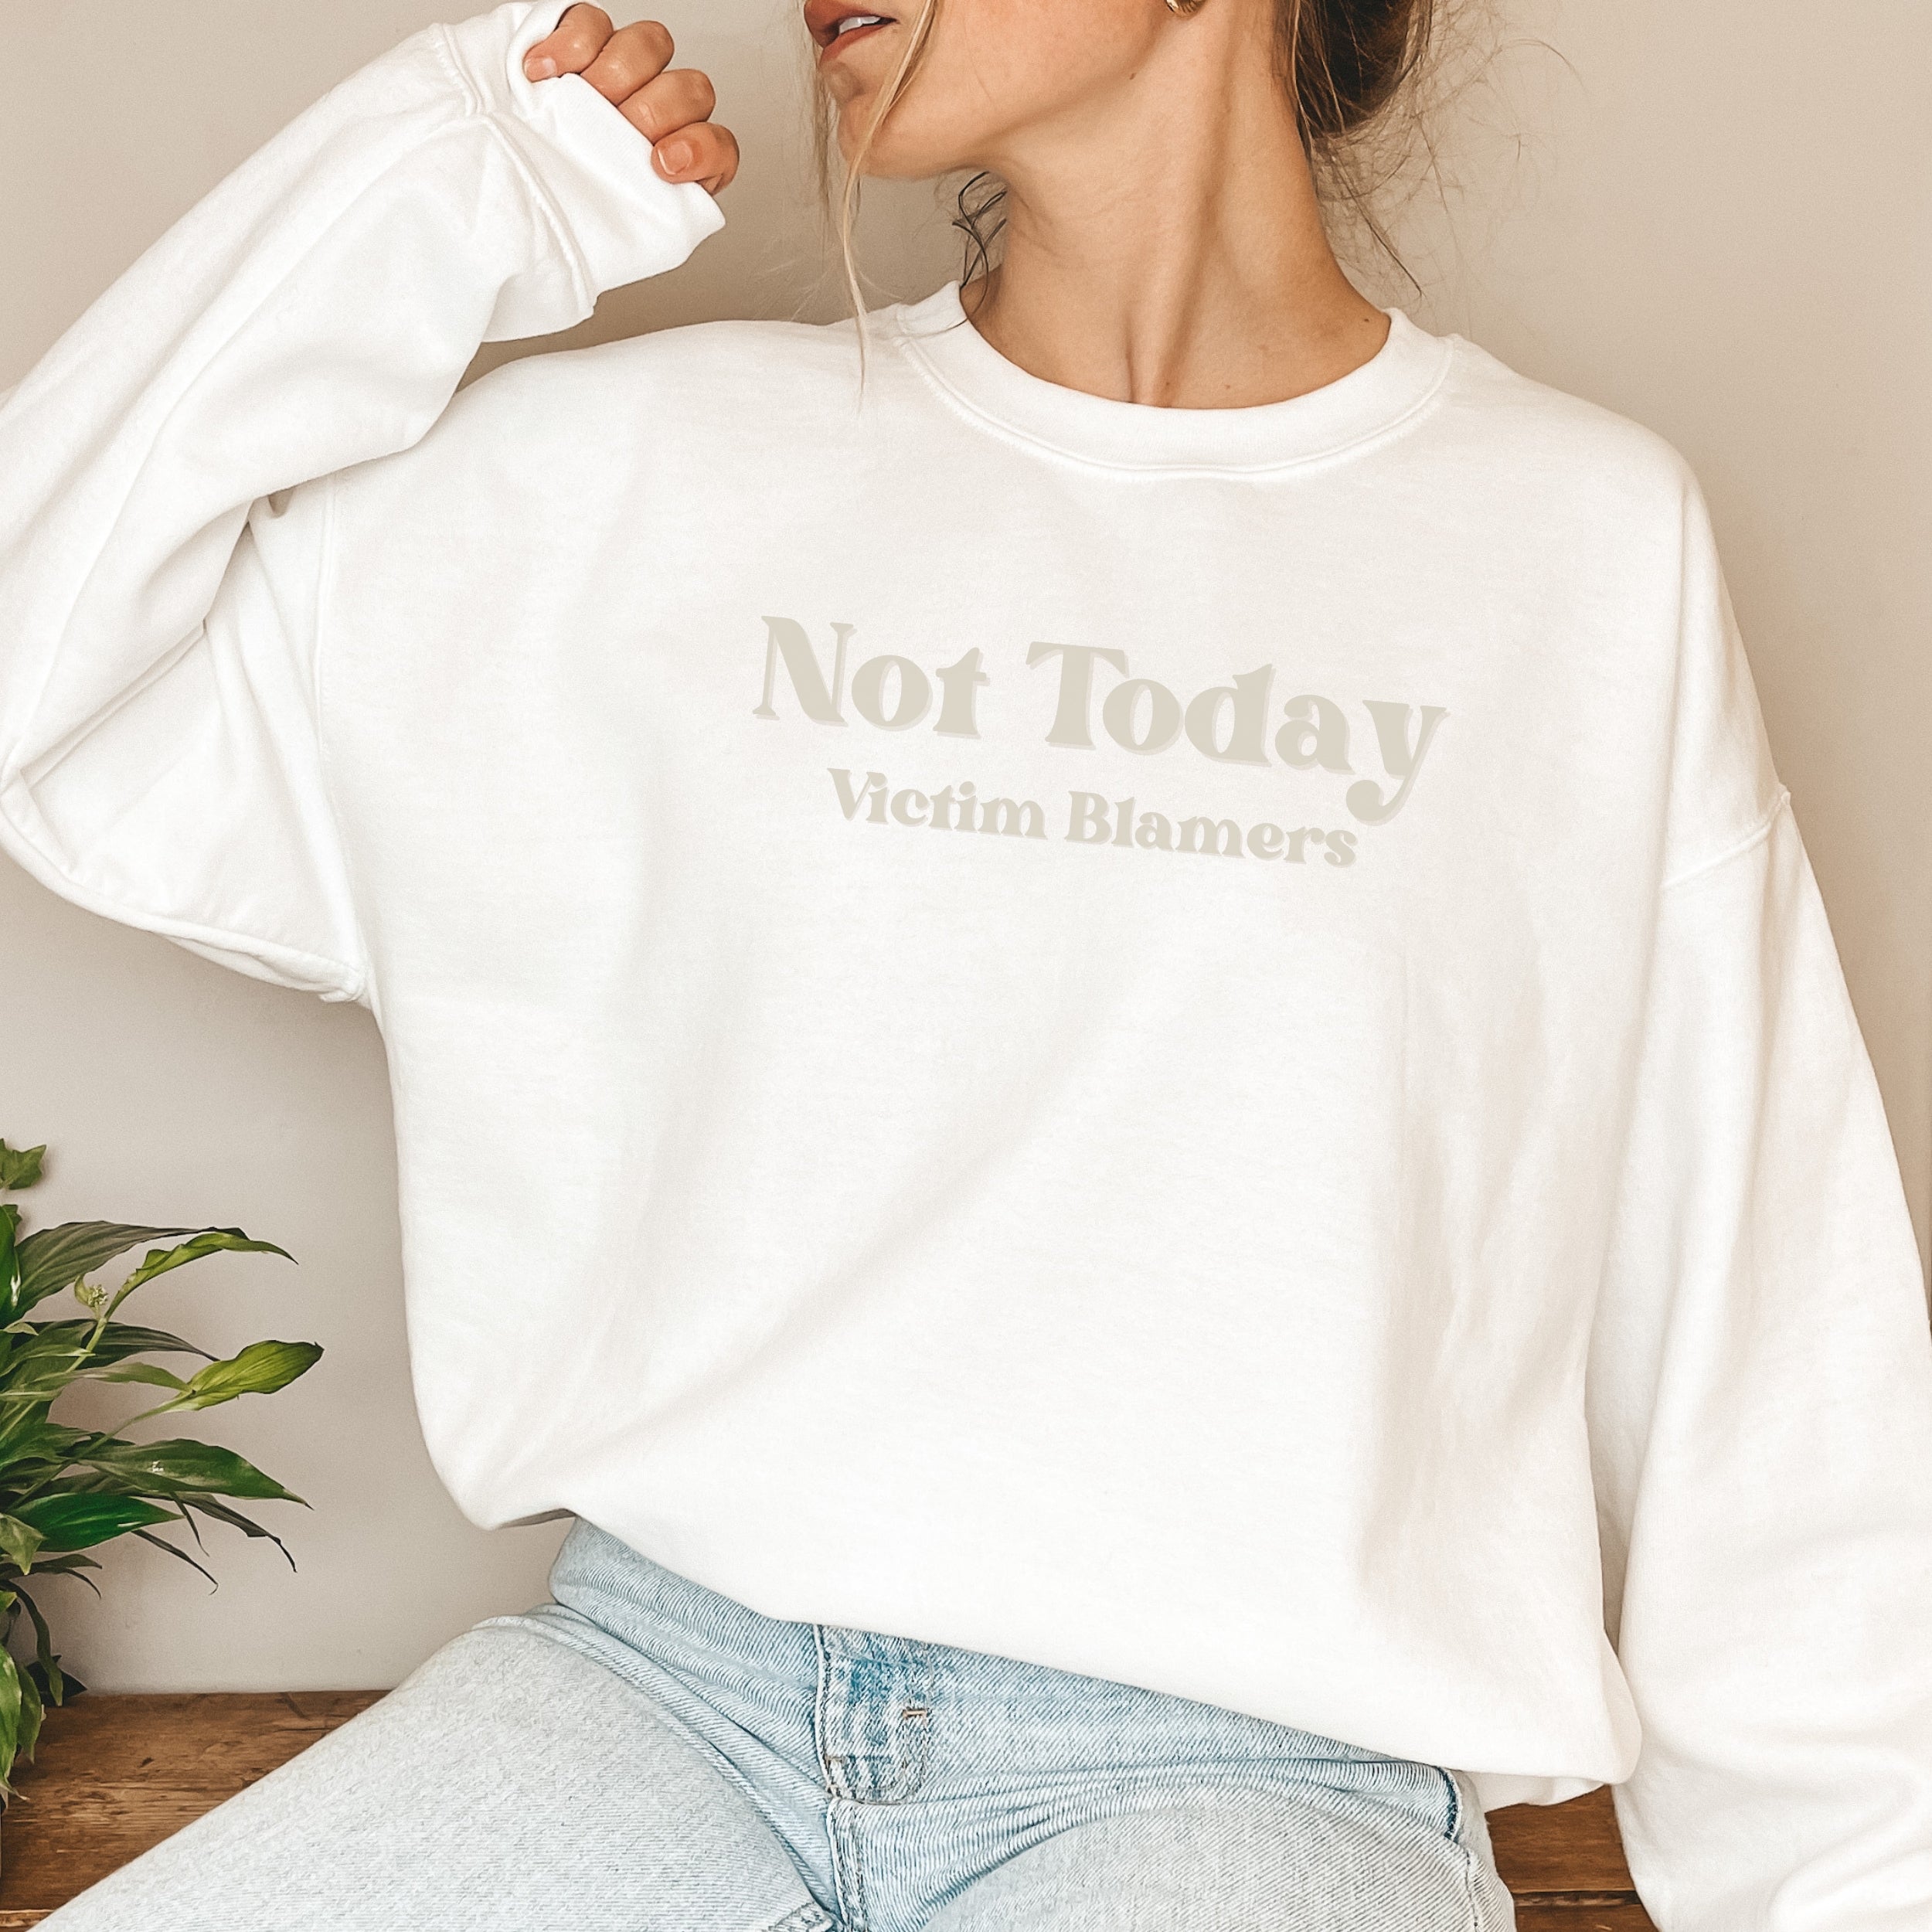 The front of the White sweatshirt proudly displays the phrase "Not Today Victim Blamers" in a Sand colored bold and eye-catching font. This message serves as a reminder that we reject victim-blaming and support those who have faced injustice.